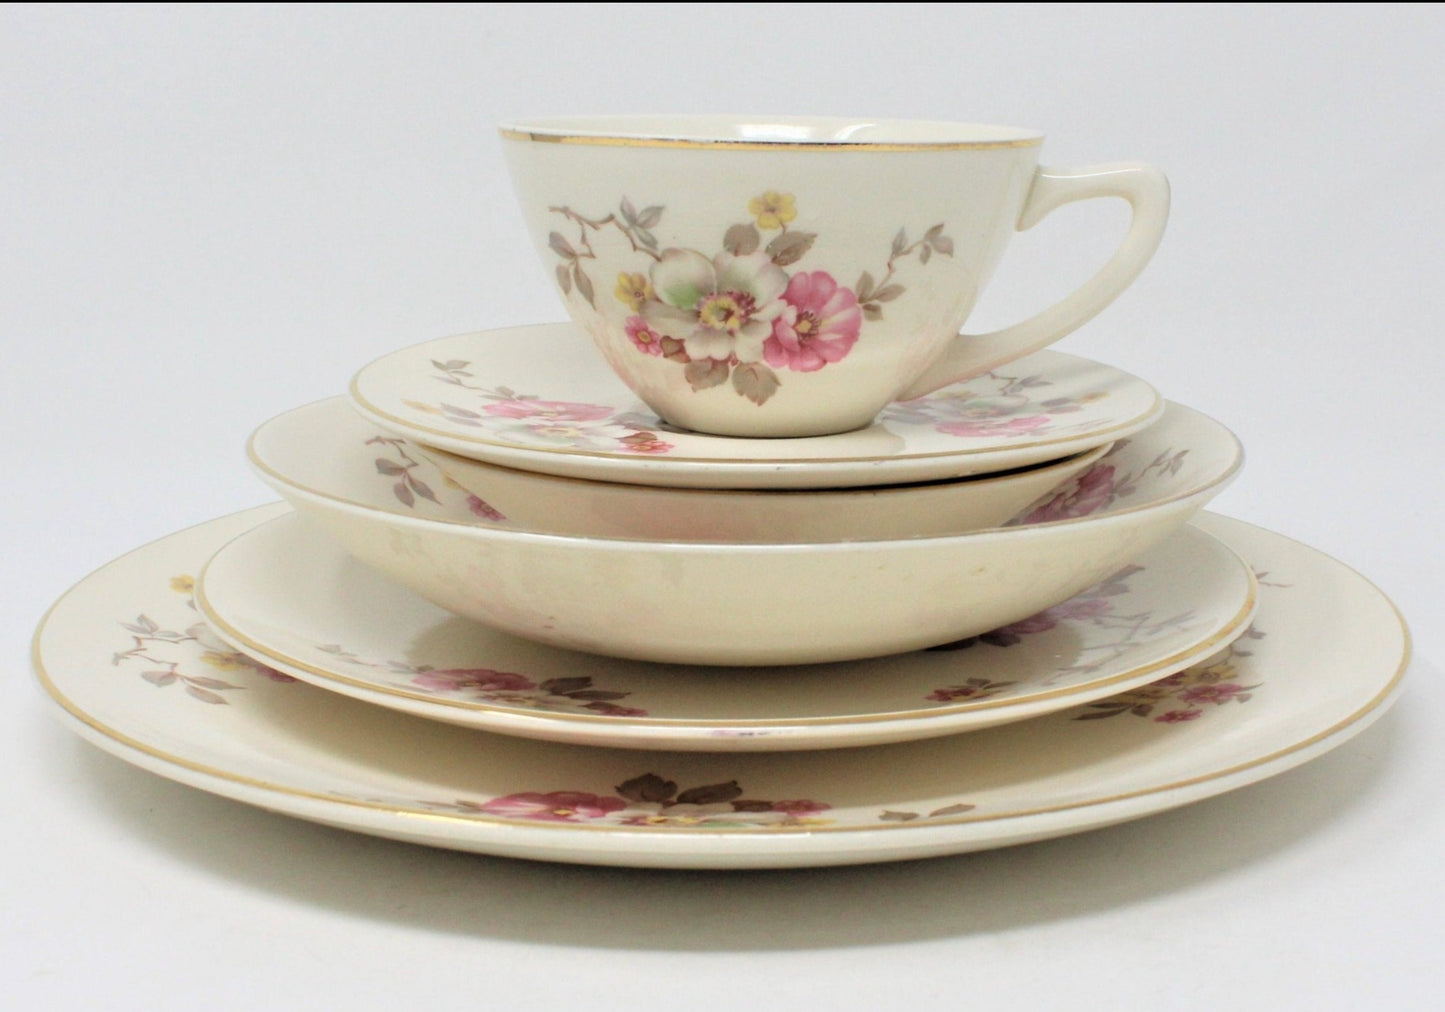 Dinnerware, Edwin M Knowles, Blossom Time, Service for 4, 24 Pcs, Vintage